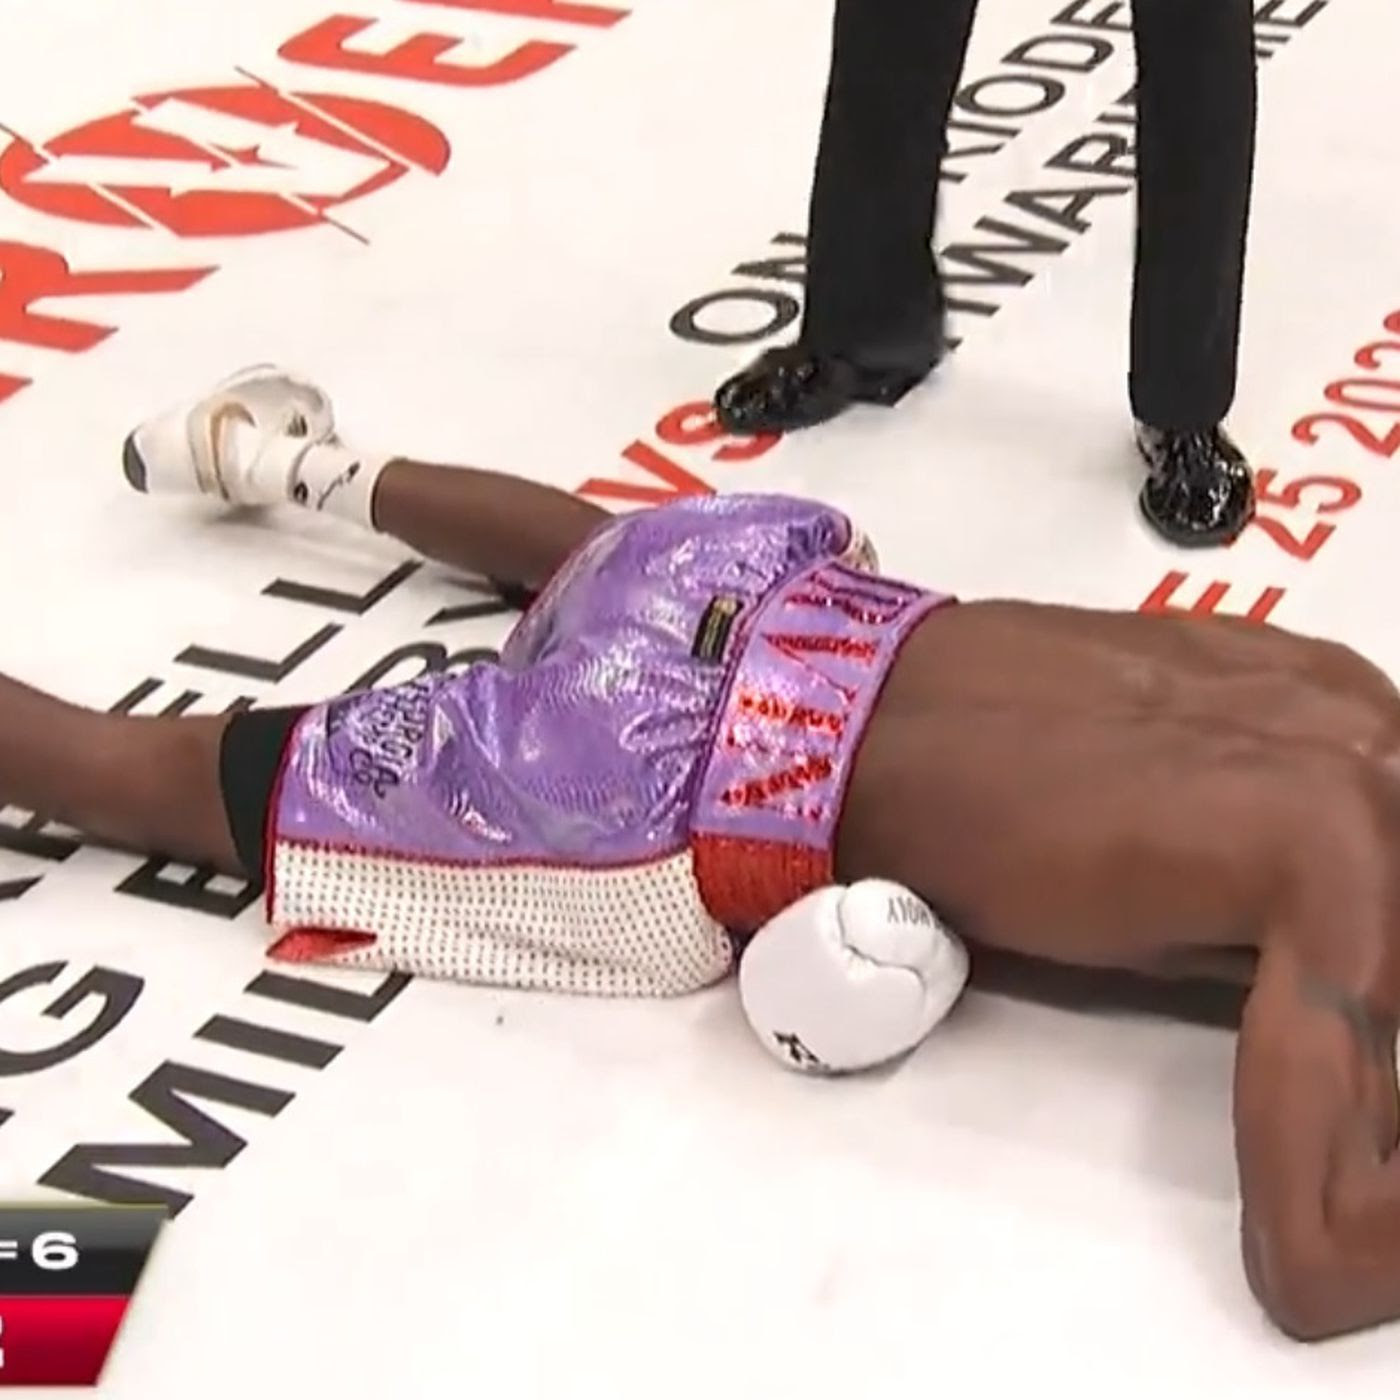 Video: Evan Holyfield, son of Evander, suffers brutal knockout in massive upset loss